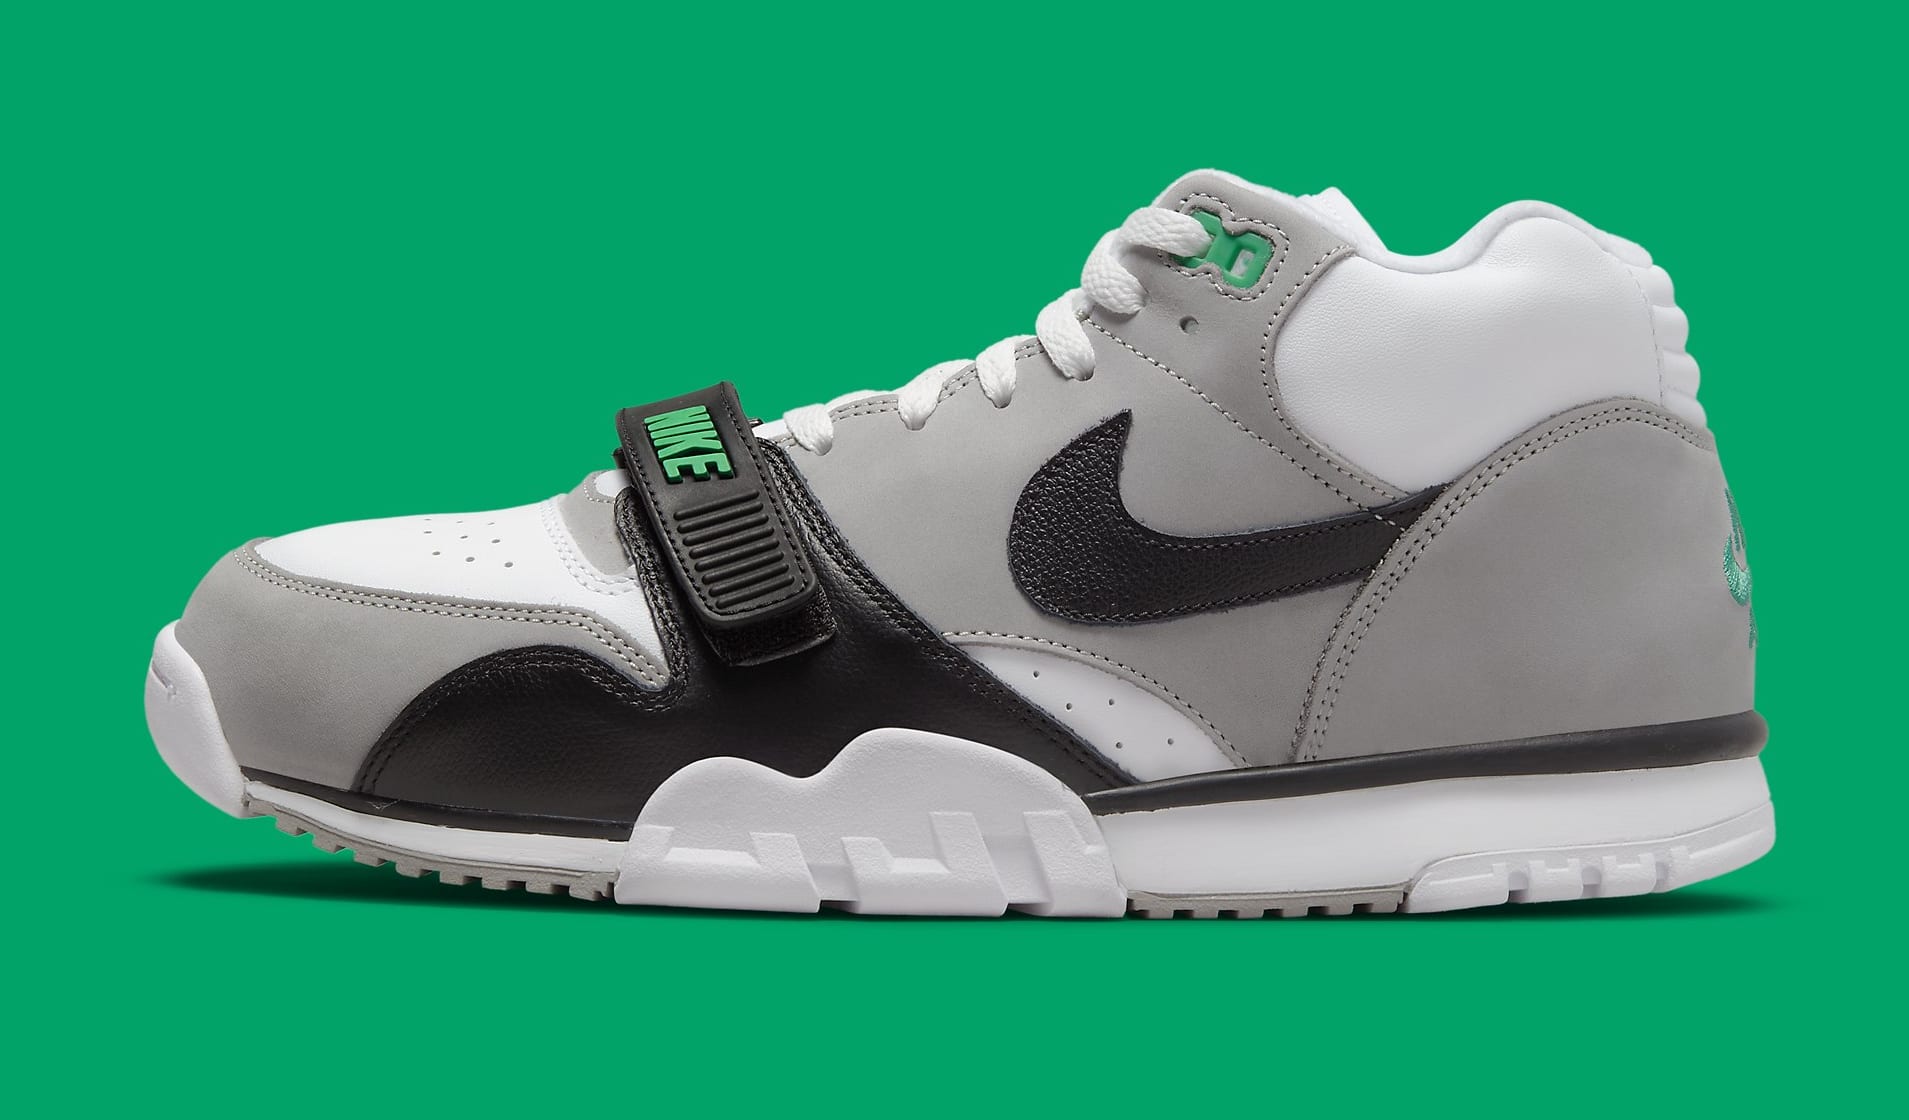 Nike Air Trainer 1 Mid 'Chlorophyll' Release Date 2022 DM0521-100 